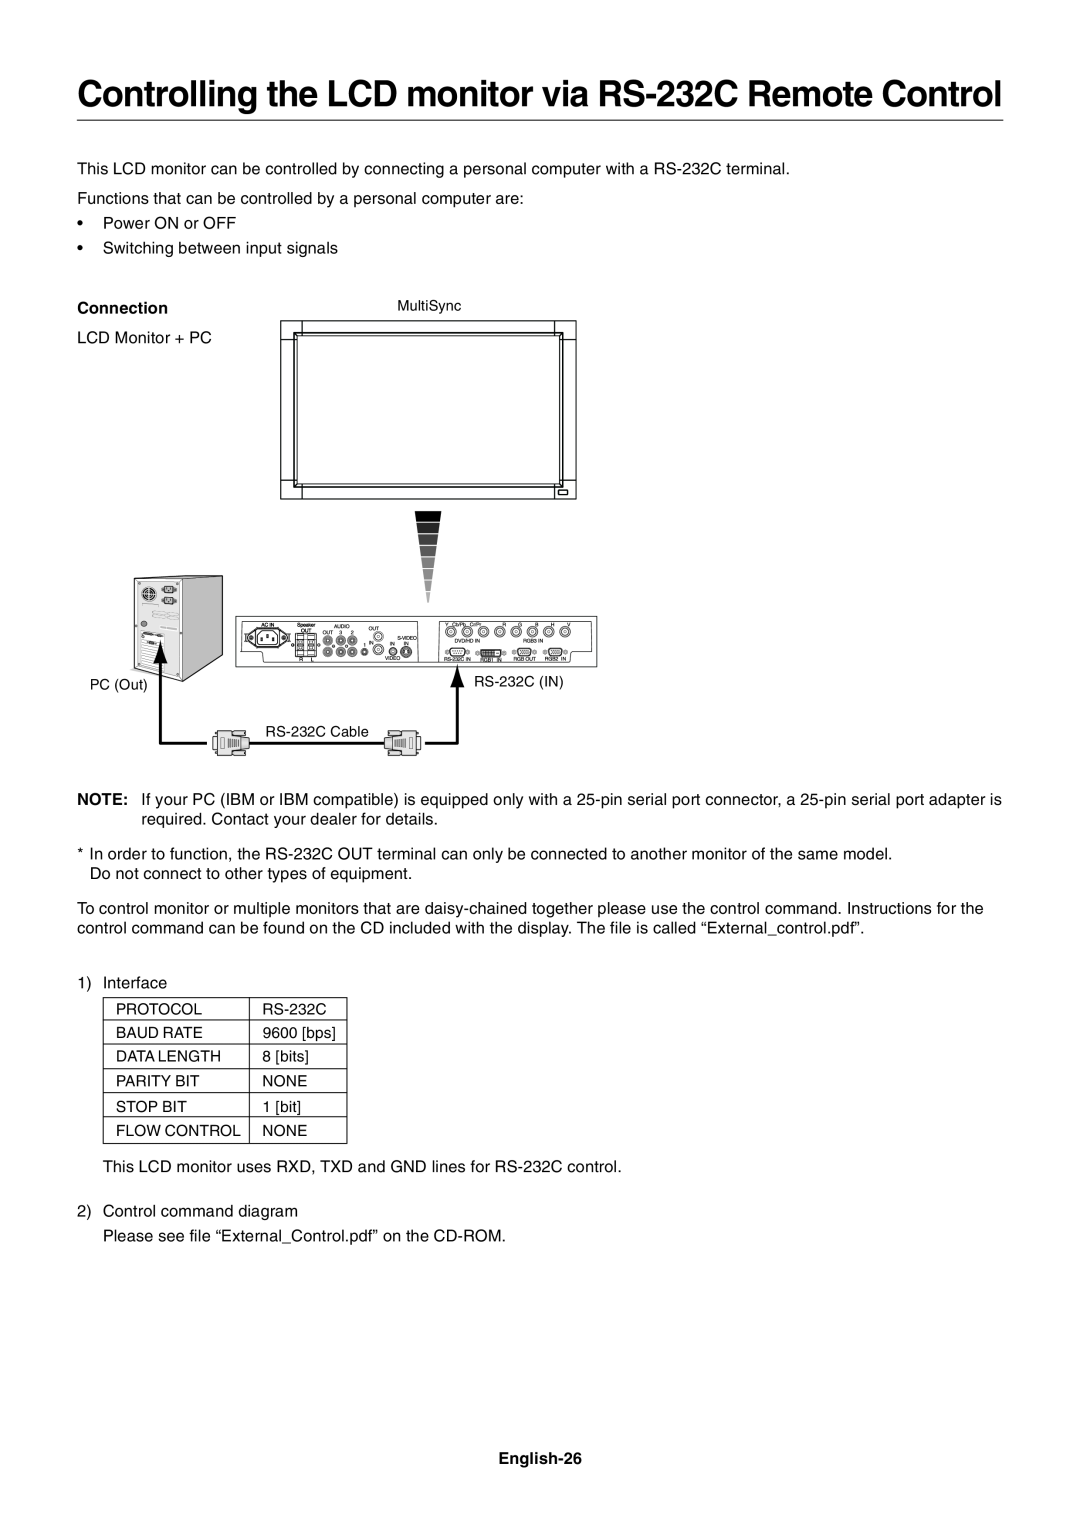 NEC LCD3215, LCD4215 user manual Controlling the LCD monitor via RS-232C Remote Control, Connection, English-26 